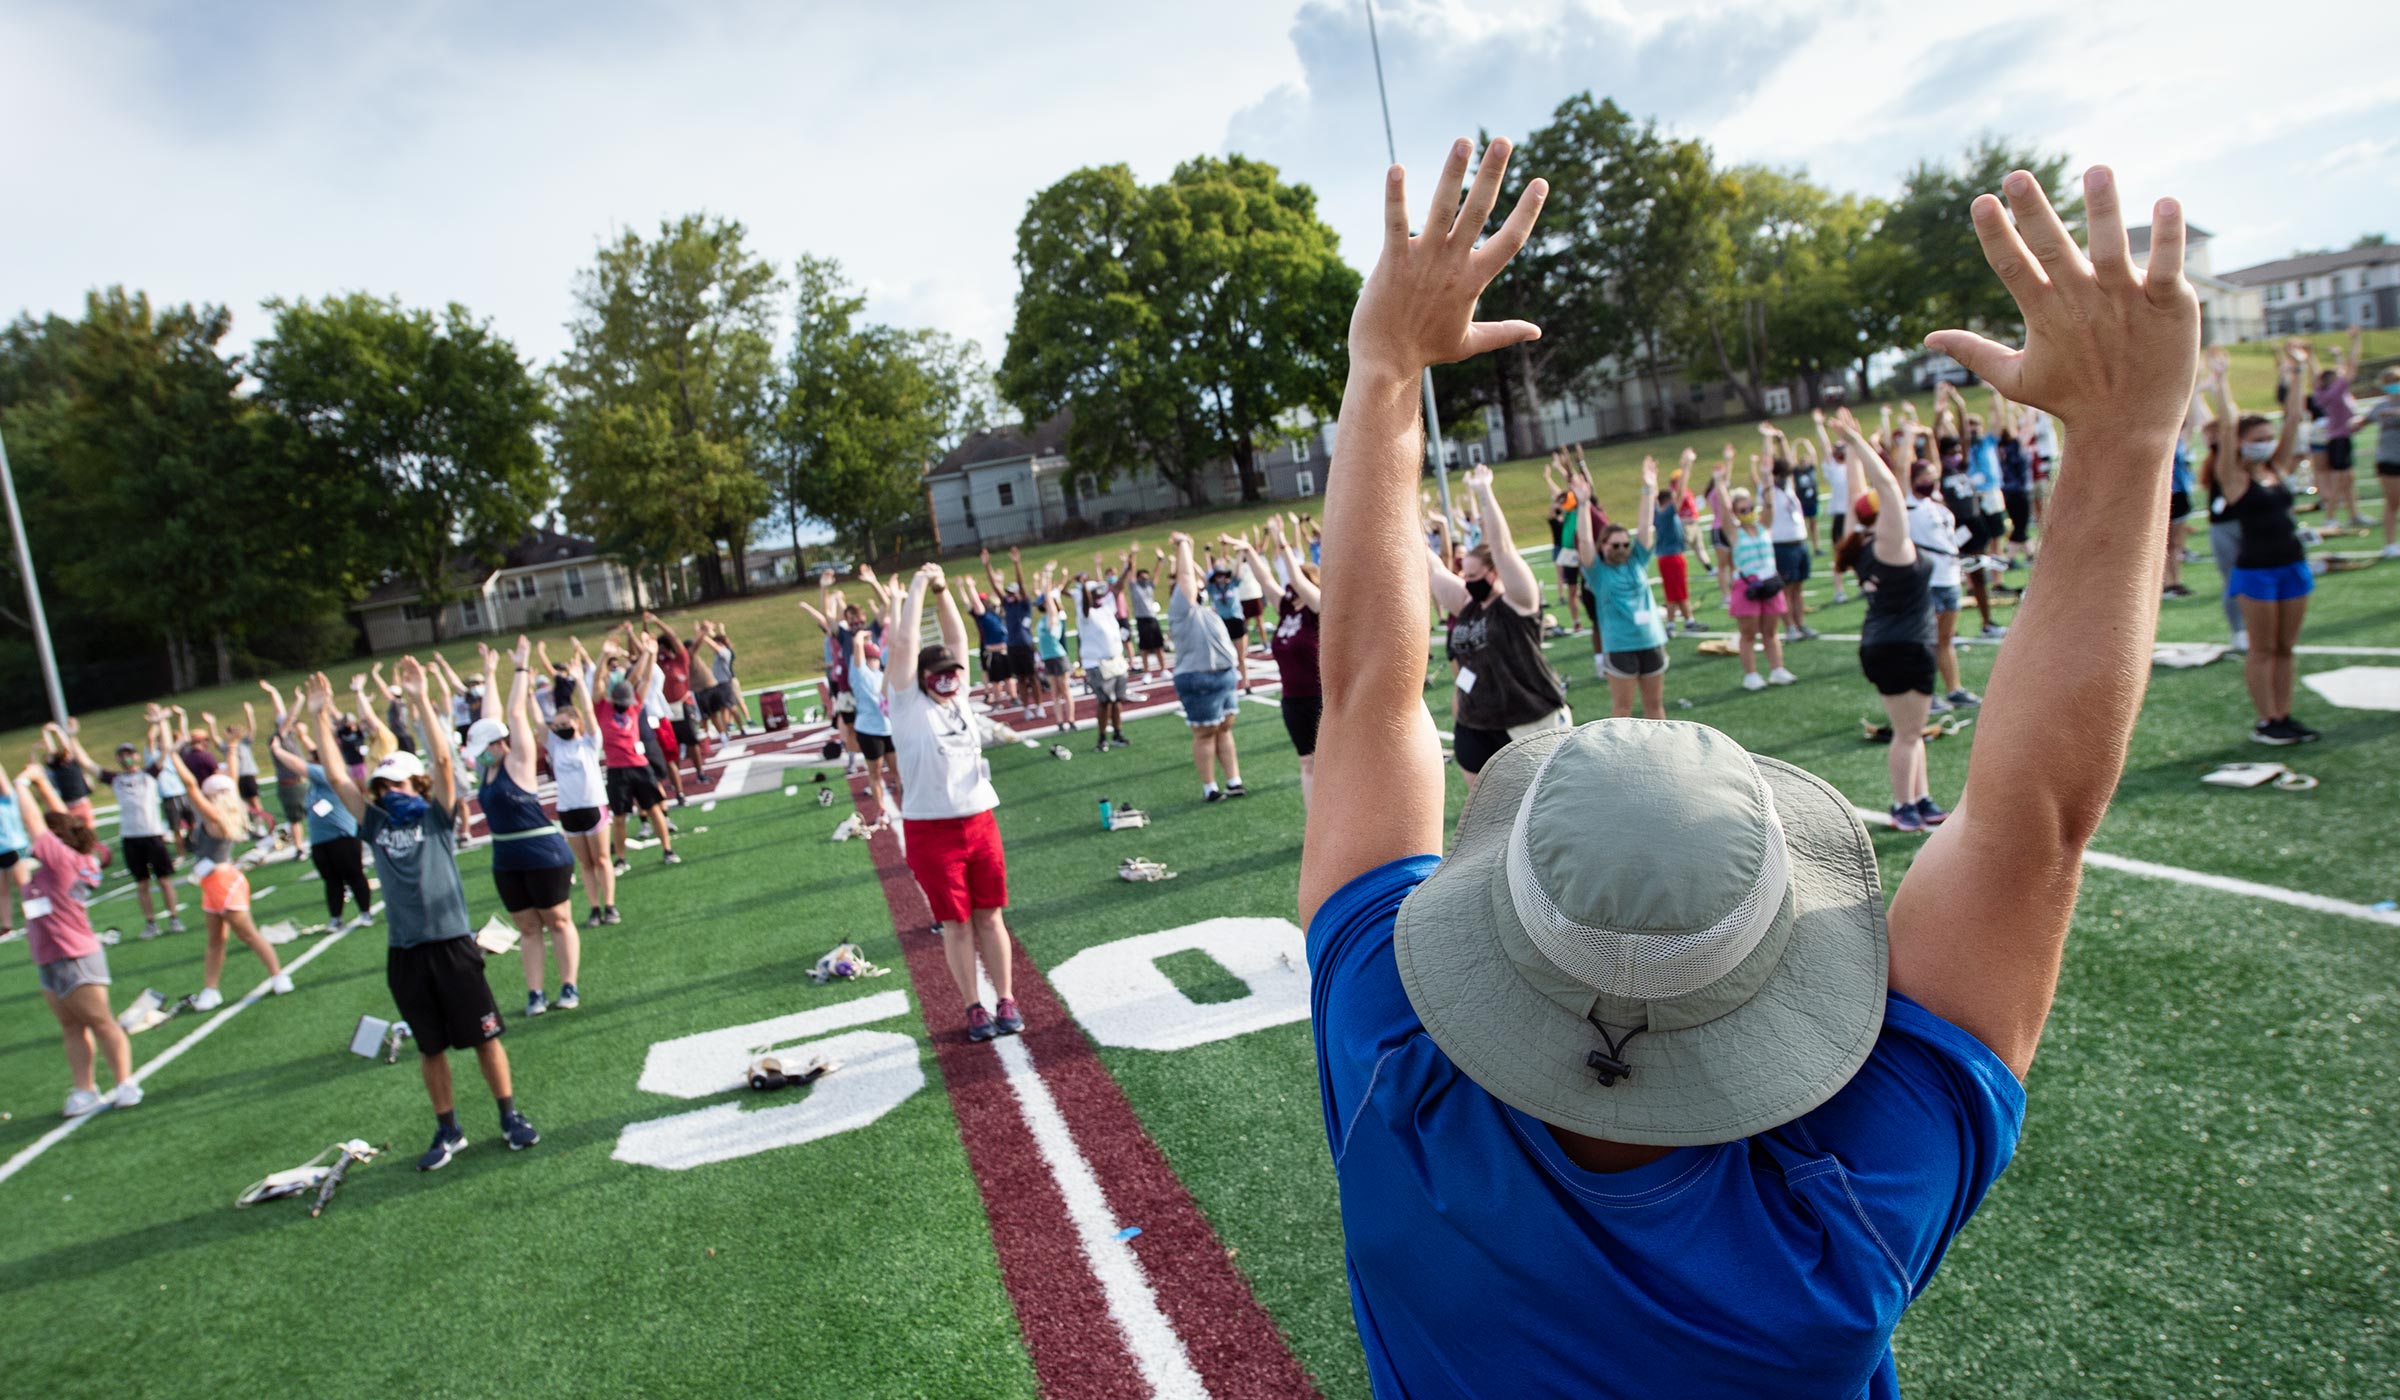 Drum Major stretches his arms overhead, leading the band in a warm-up on their practice fields.